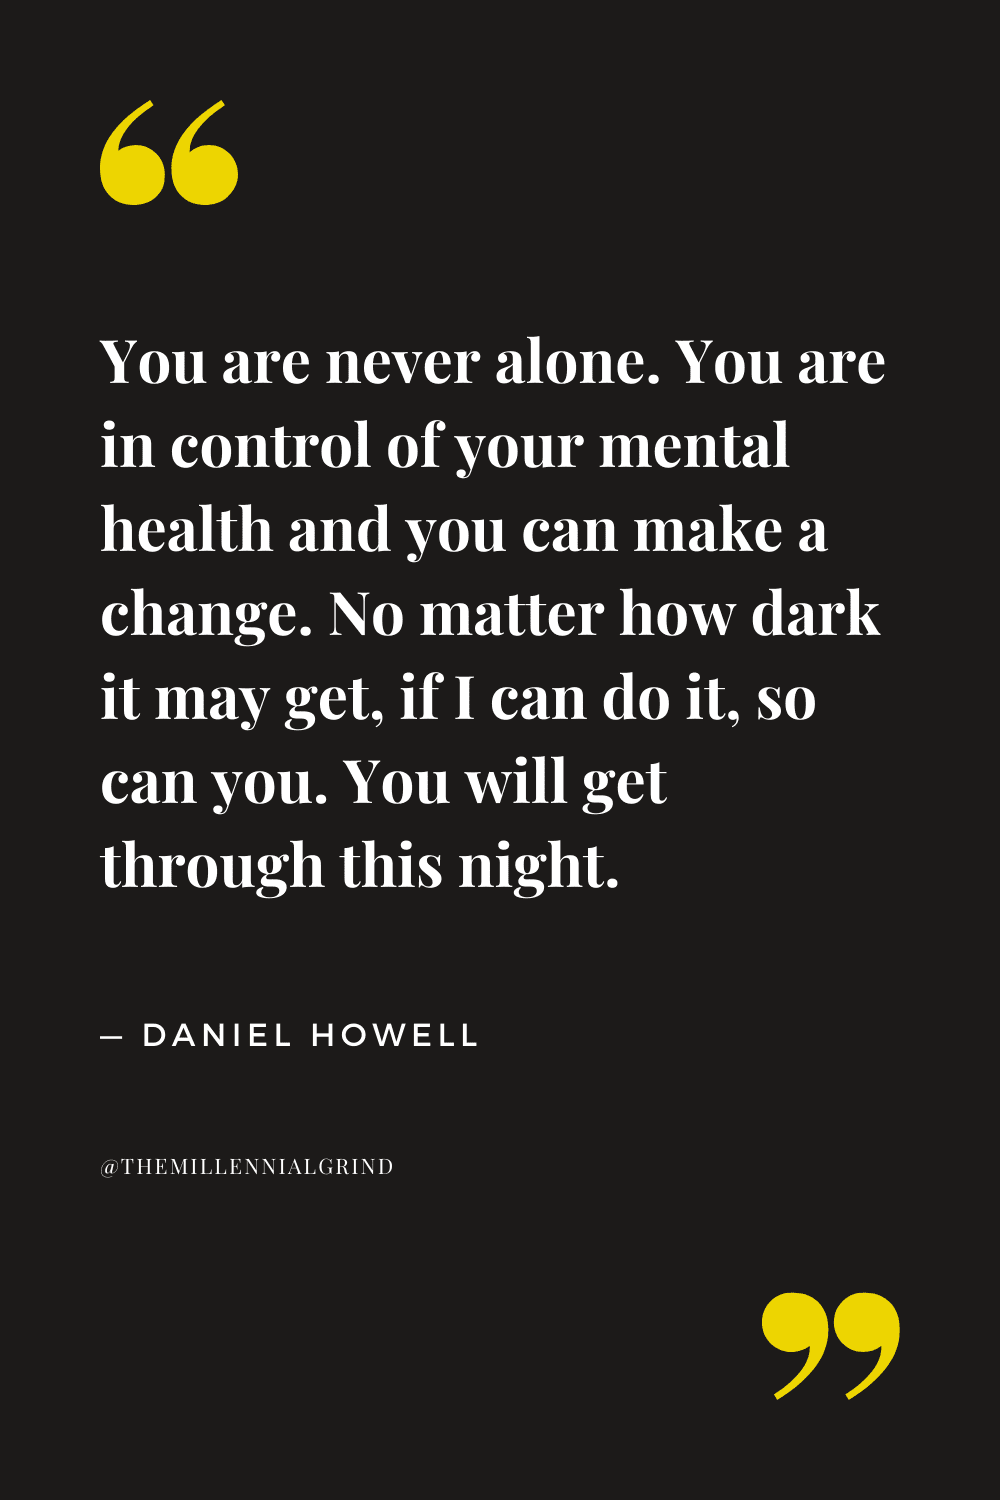 Quotes from You Will Get Through This Night by Daniel Howell